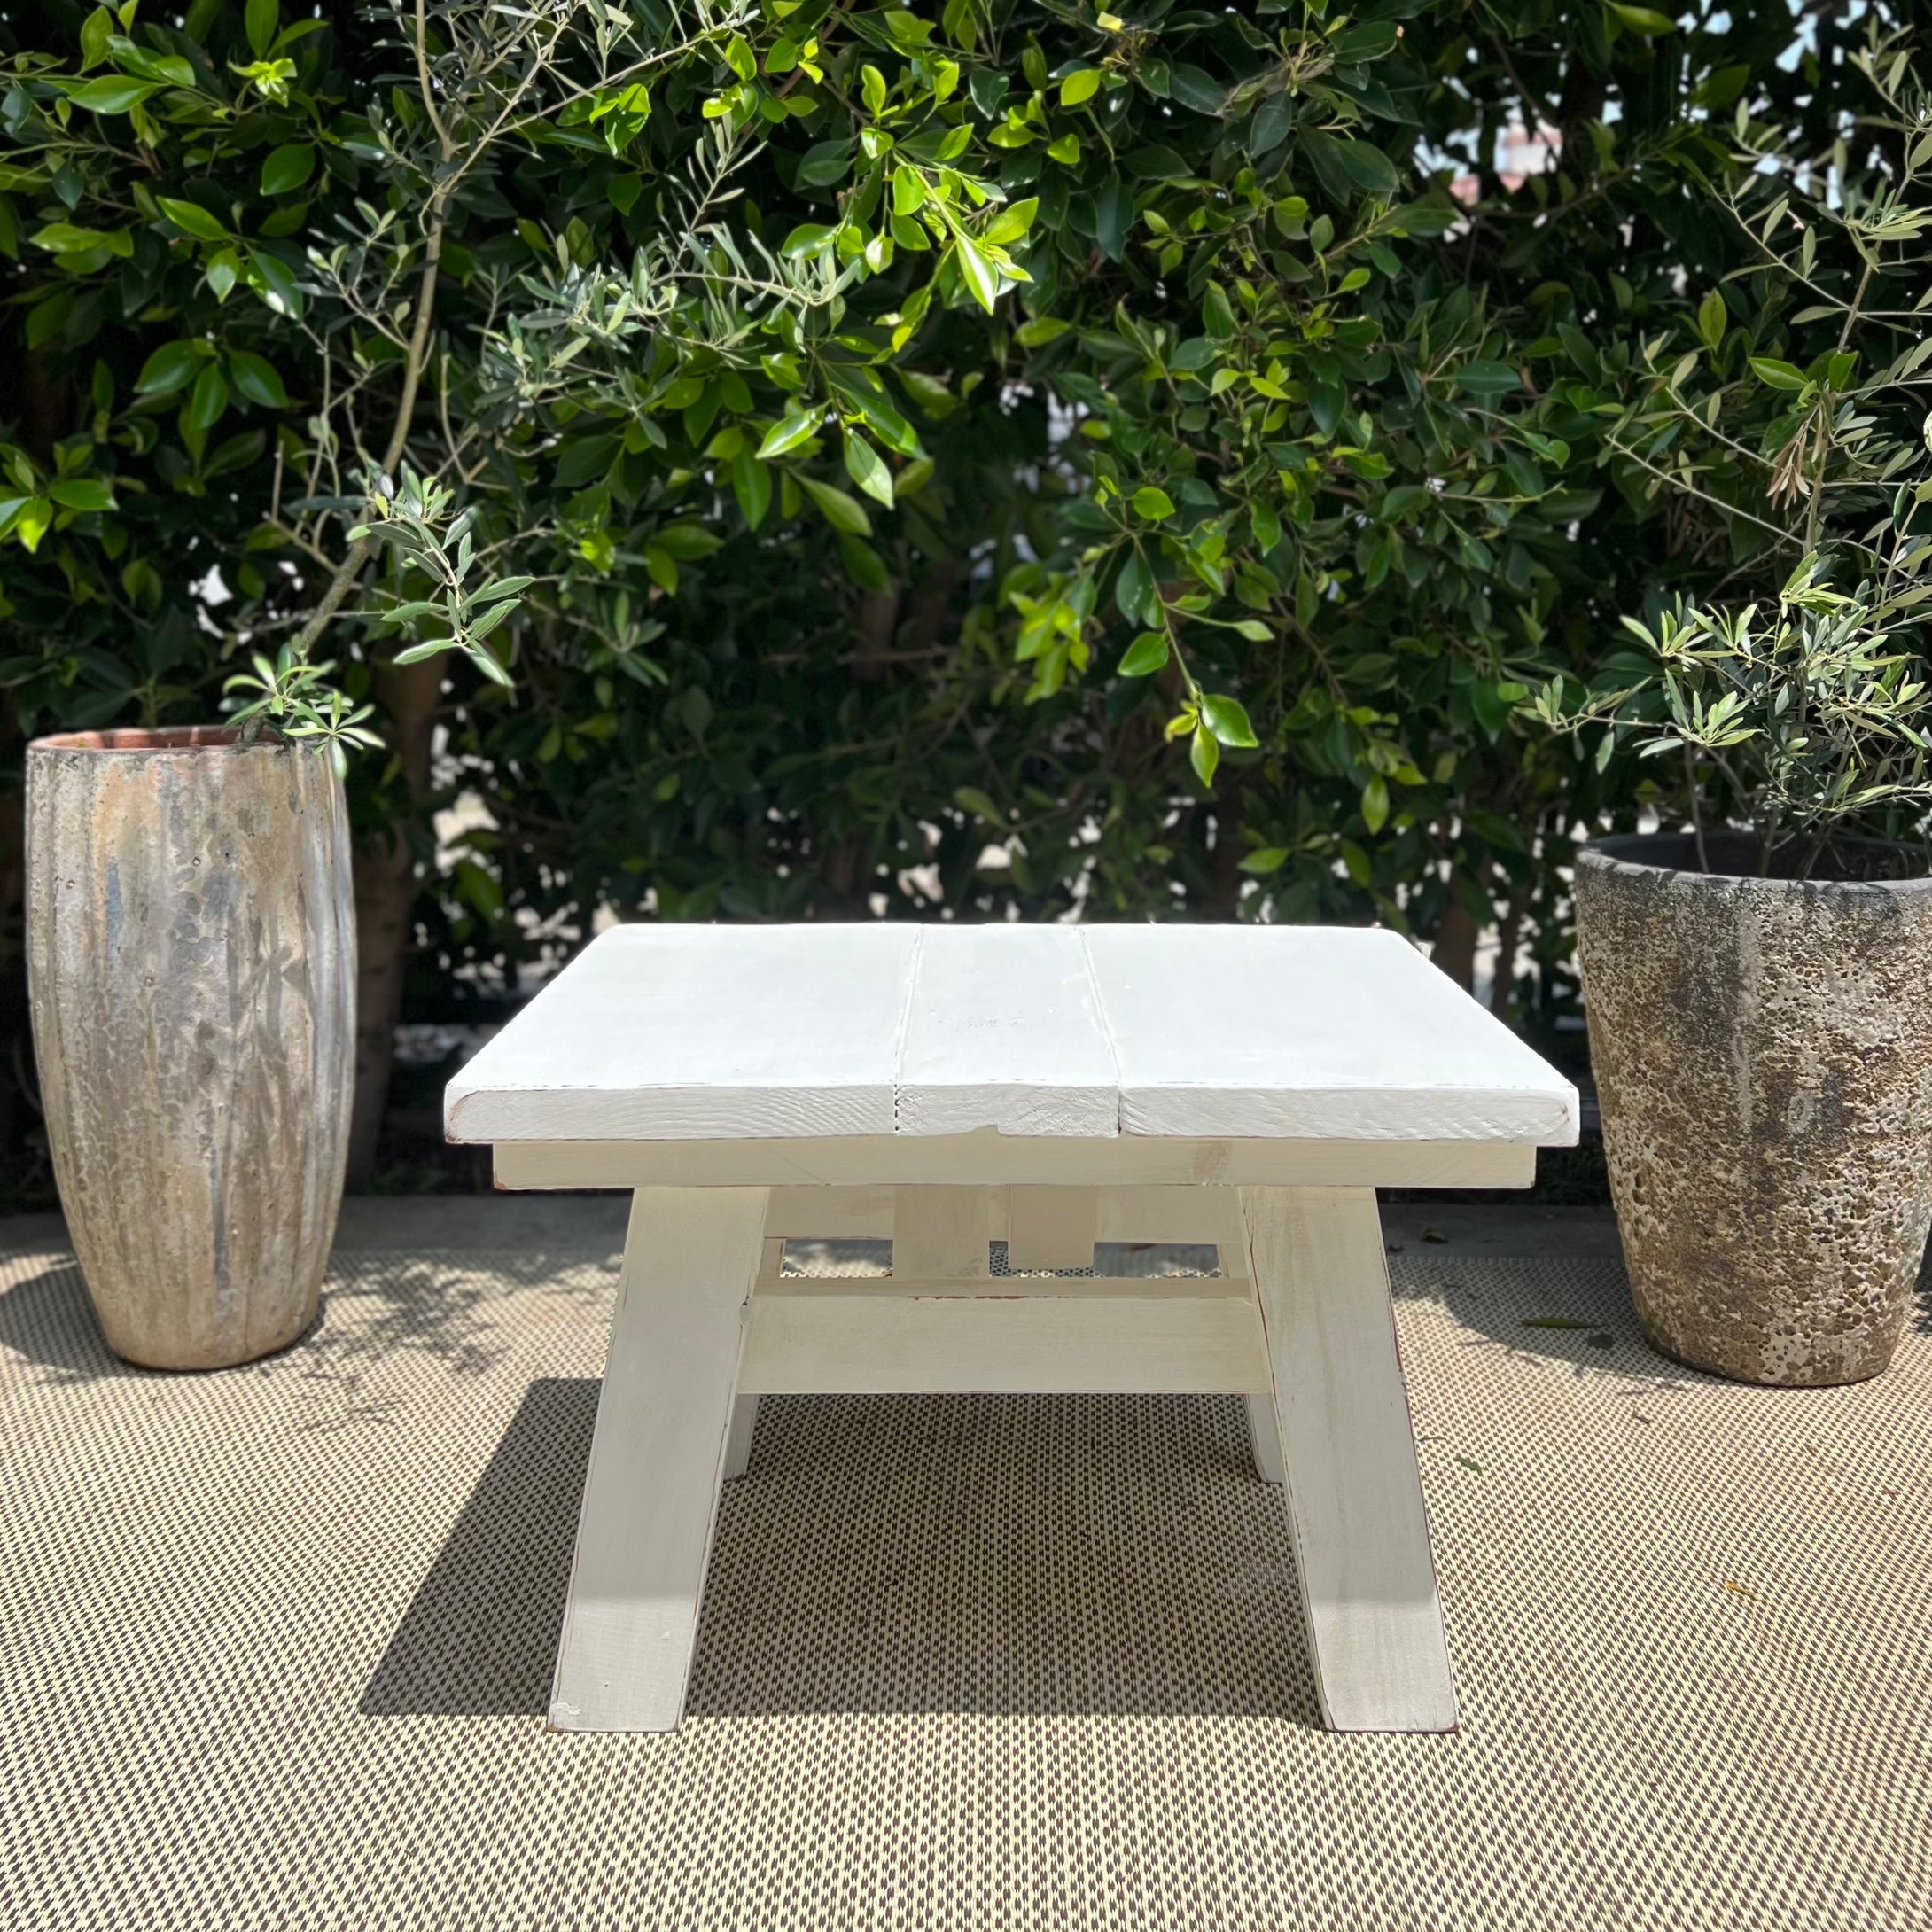 The Kid's Patio Table